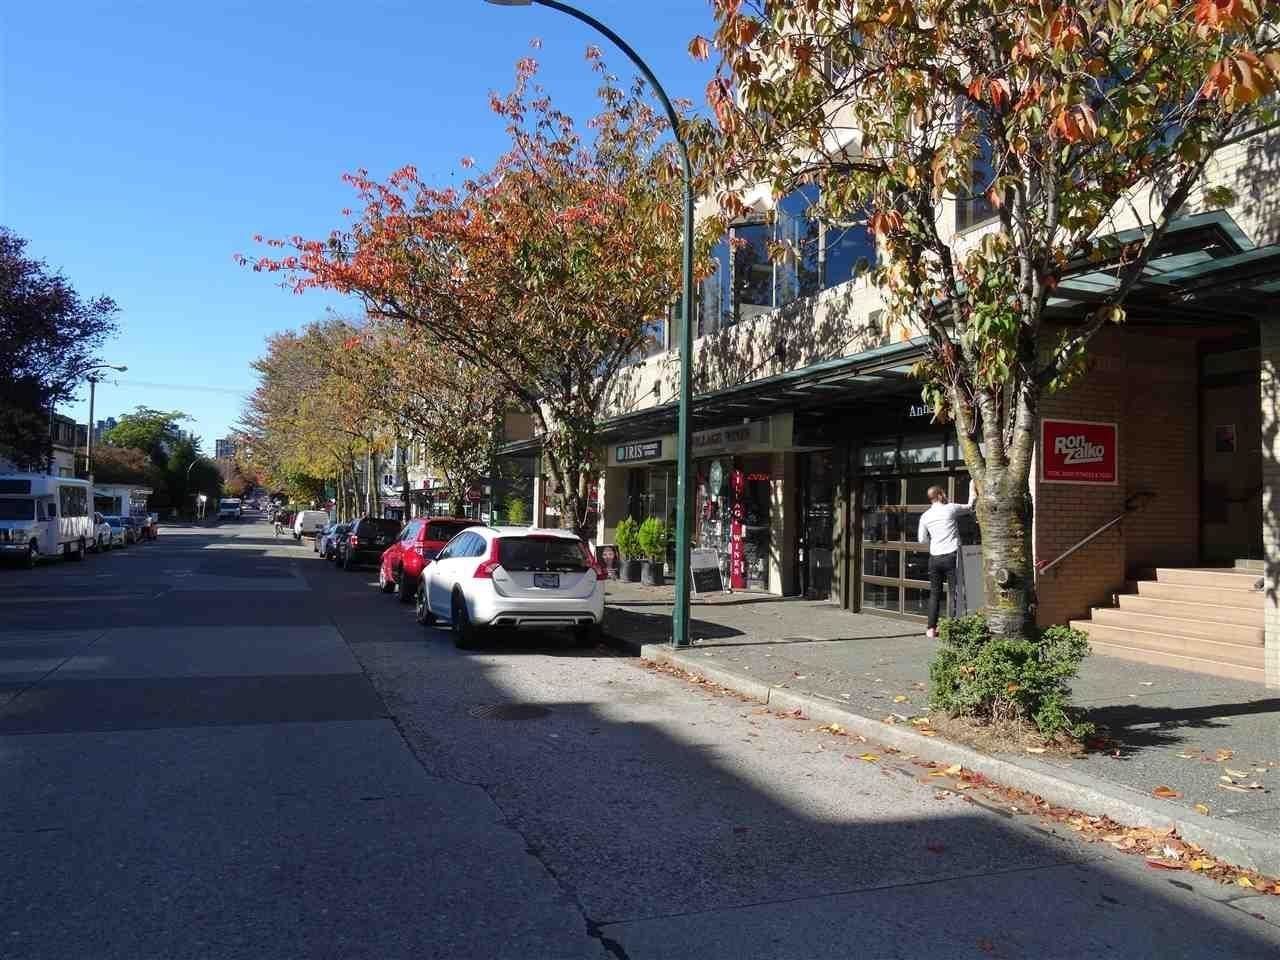 Main Photo: 25 1835 & 1855 W 1ST Avenue in Vancouver: Kitsilano Retail for sale (Vancouver West)  : MLS®# C8050114